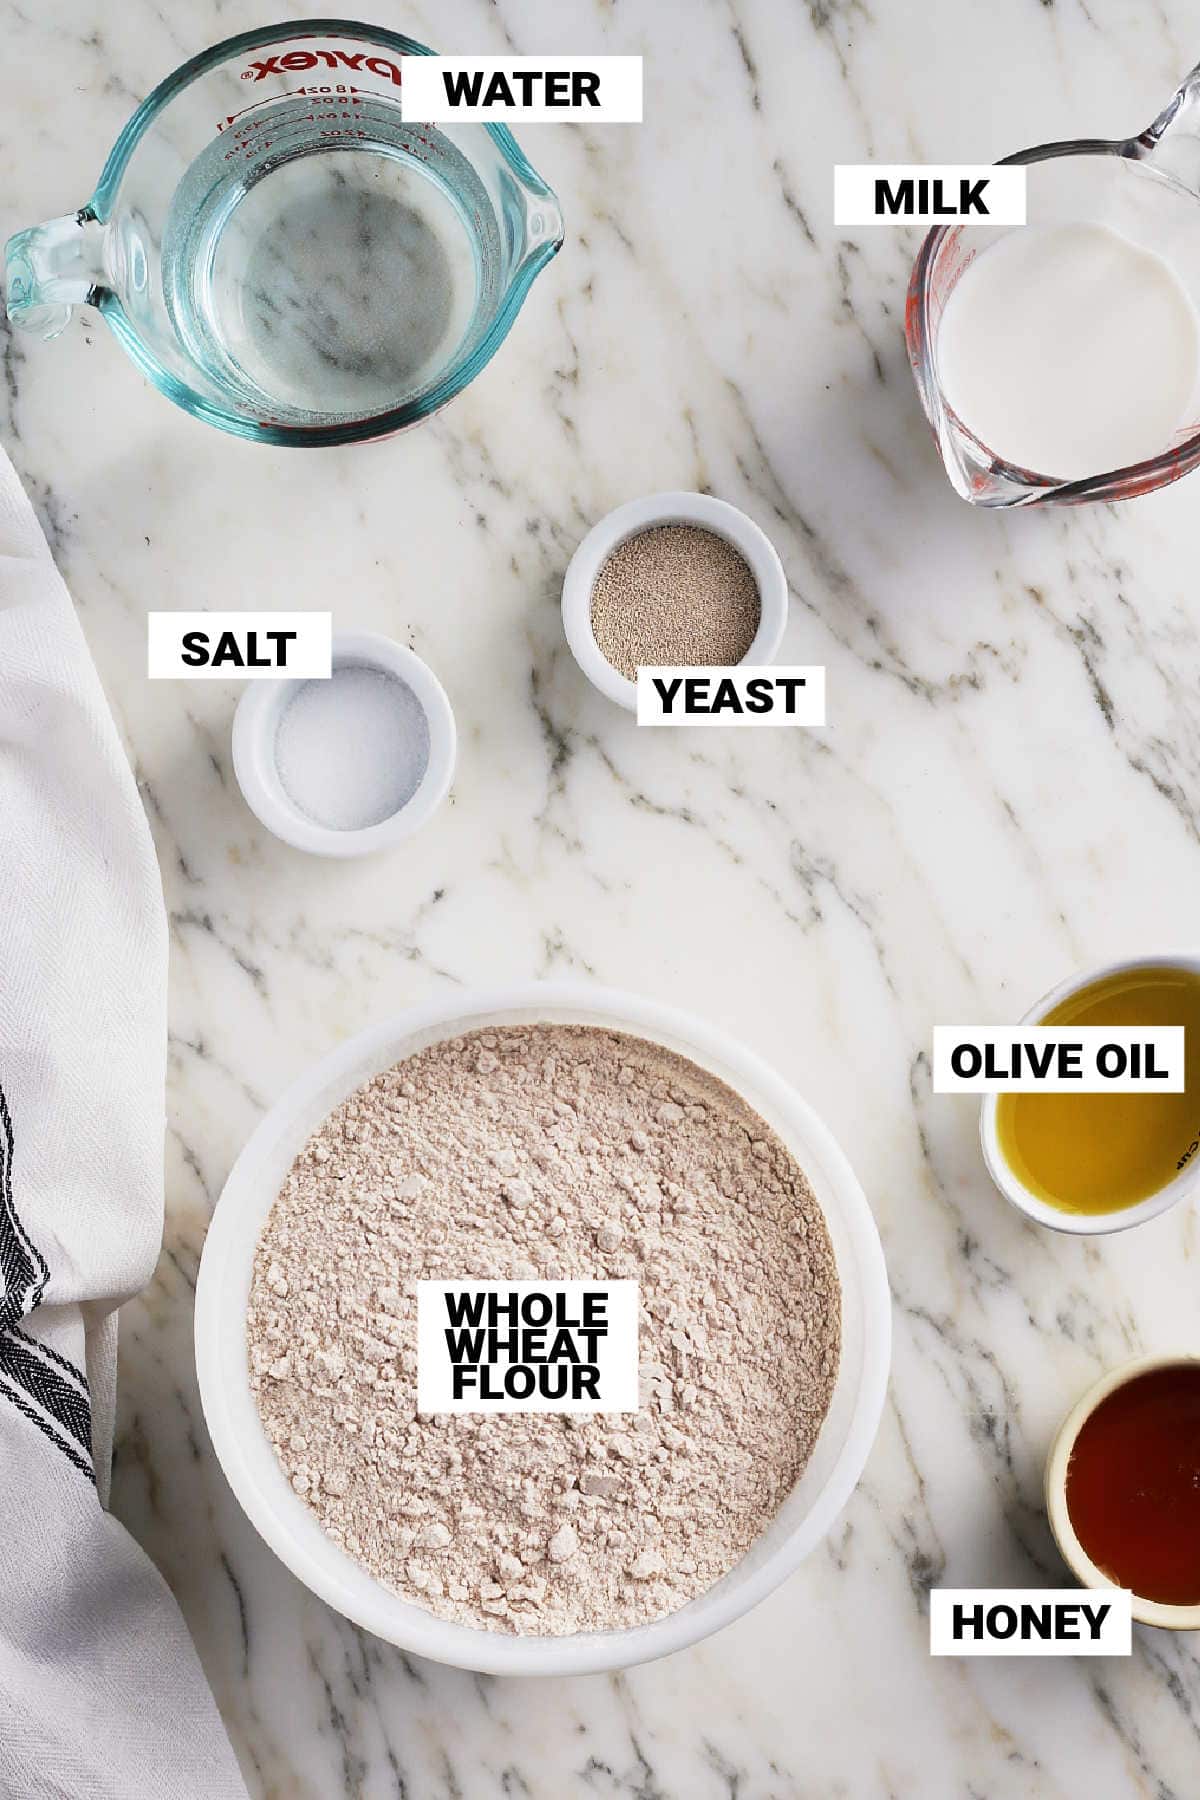 whole wheat flour, honey, olive oil, salt, yeast, milk, and water mise en place to make honey wheat bread